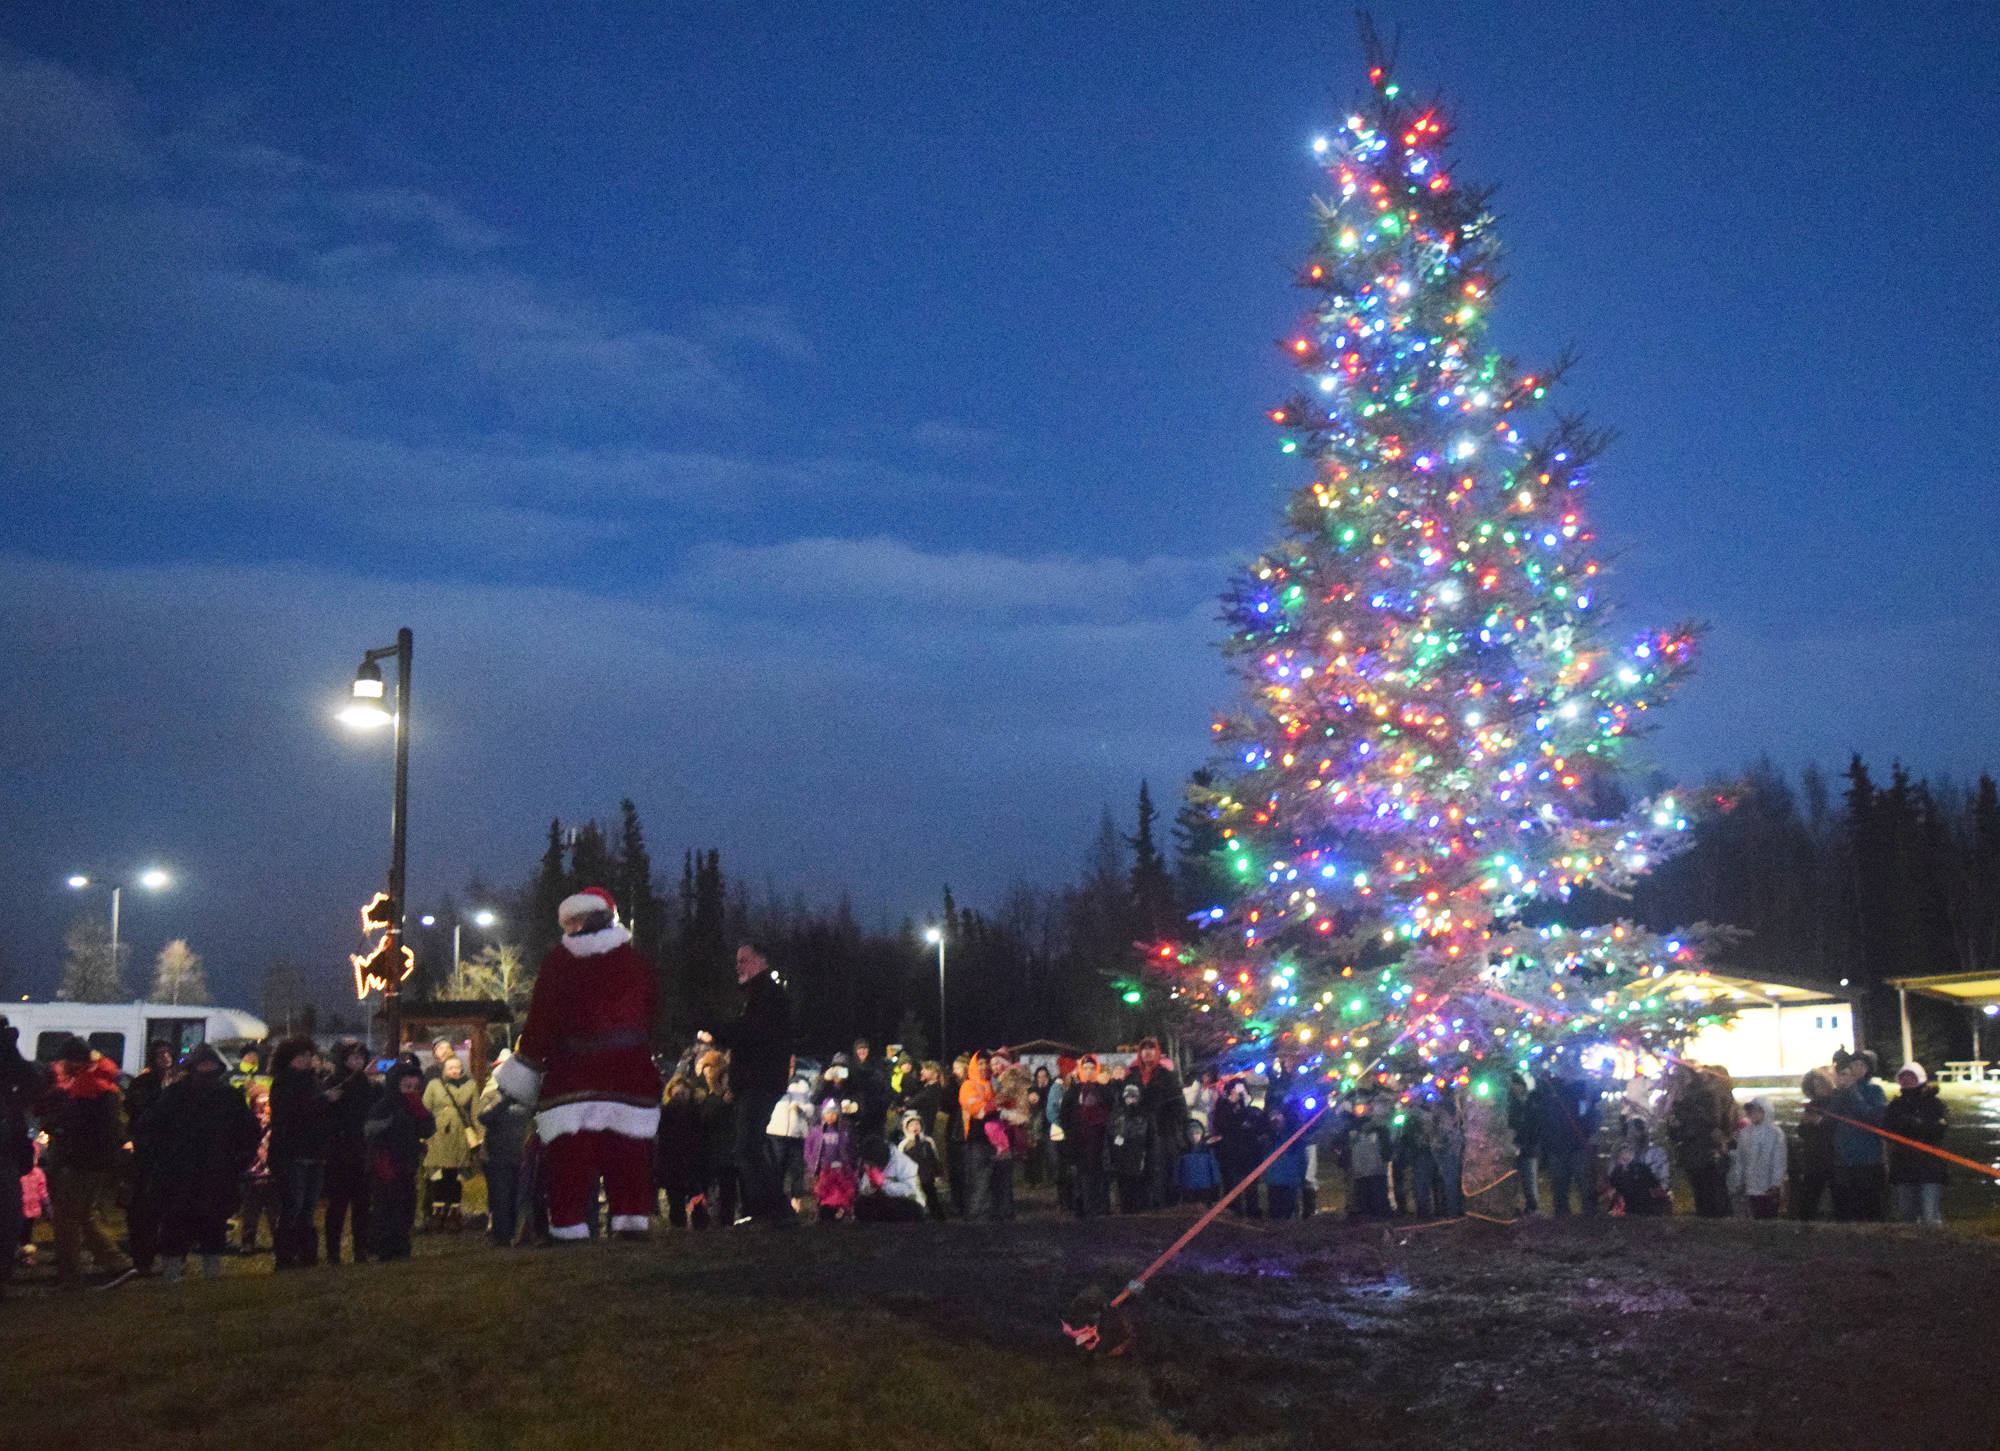 A crowd watches as Santa Claus turns on the lights adorning the Christmas tree Saturday, Dec. 1 at the Christmas in the Park tree-lighting ceremony at Soldotna Creek Park, in Soldotna, Alaska. (Photo by Joey Klecka/Peninsula Clarion)